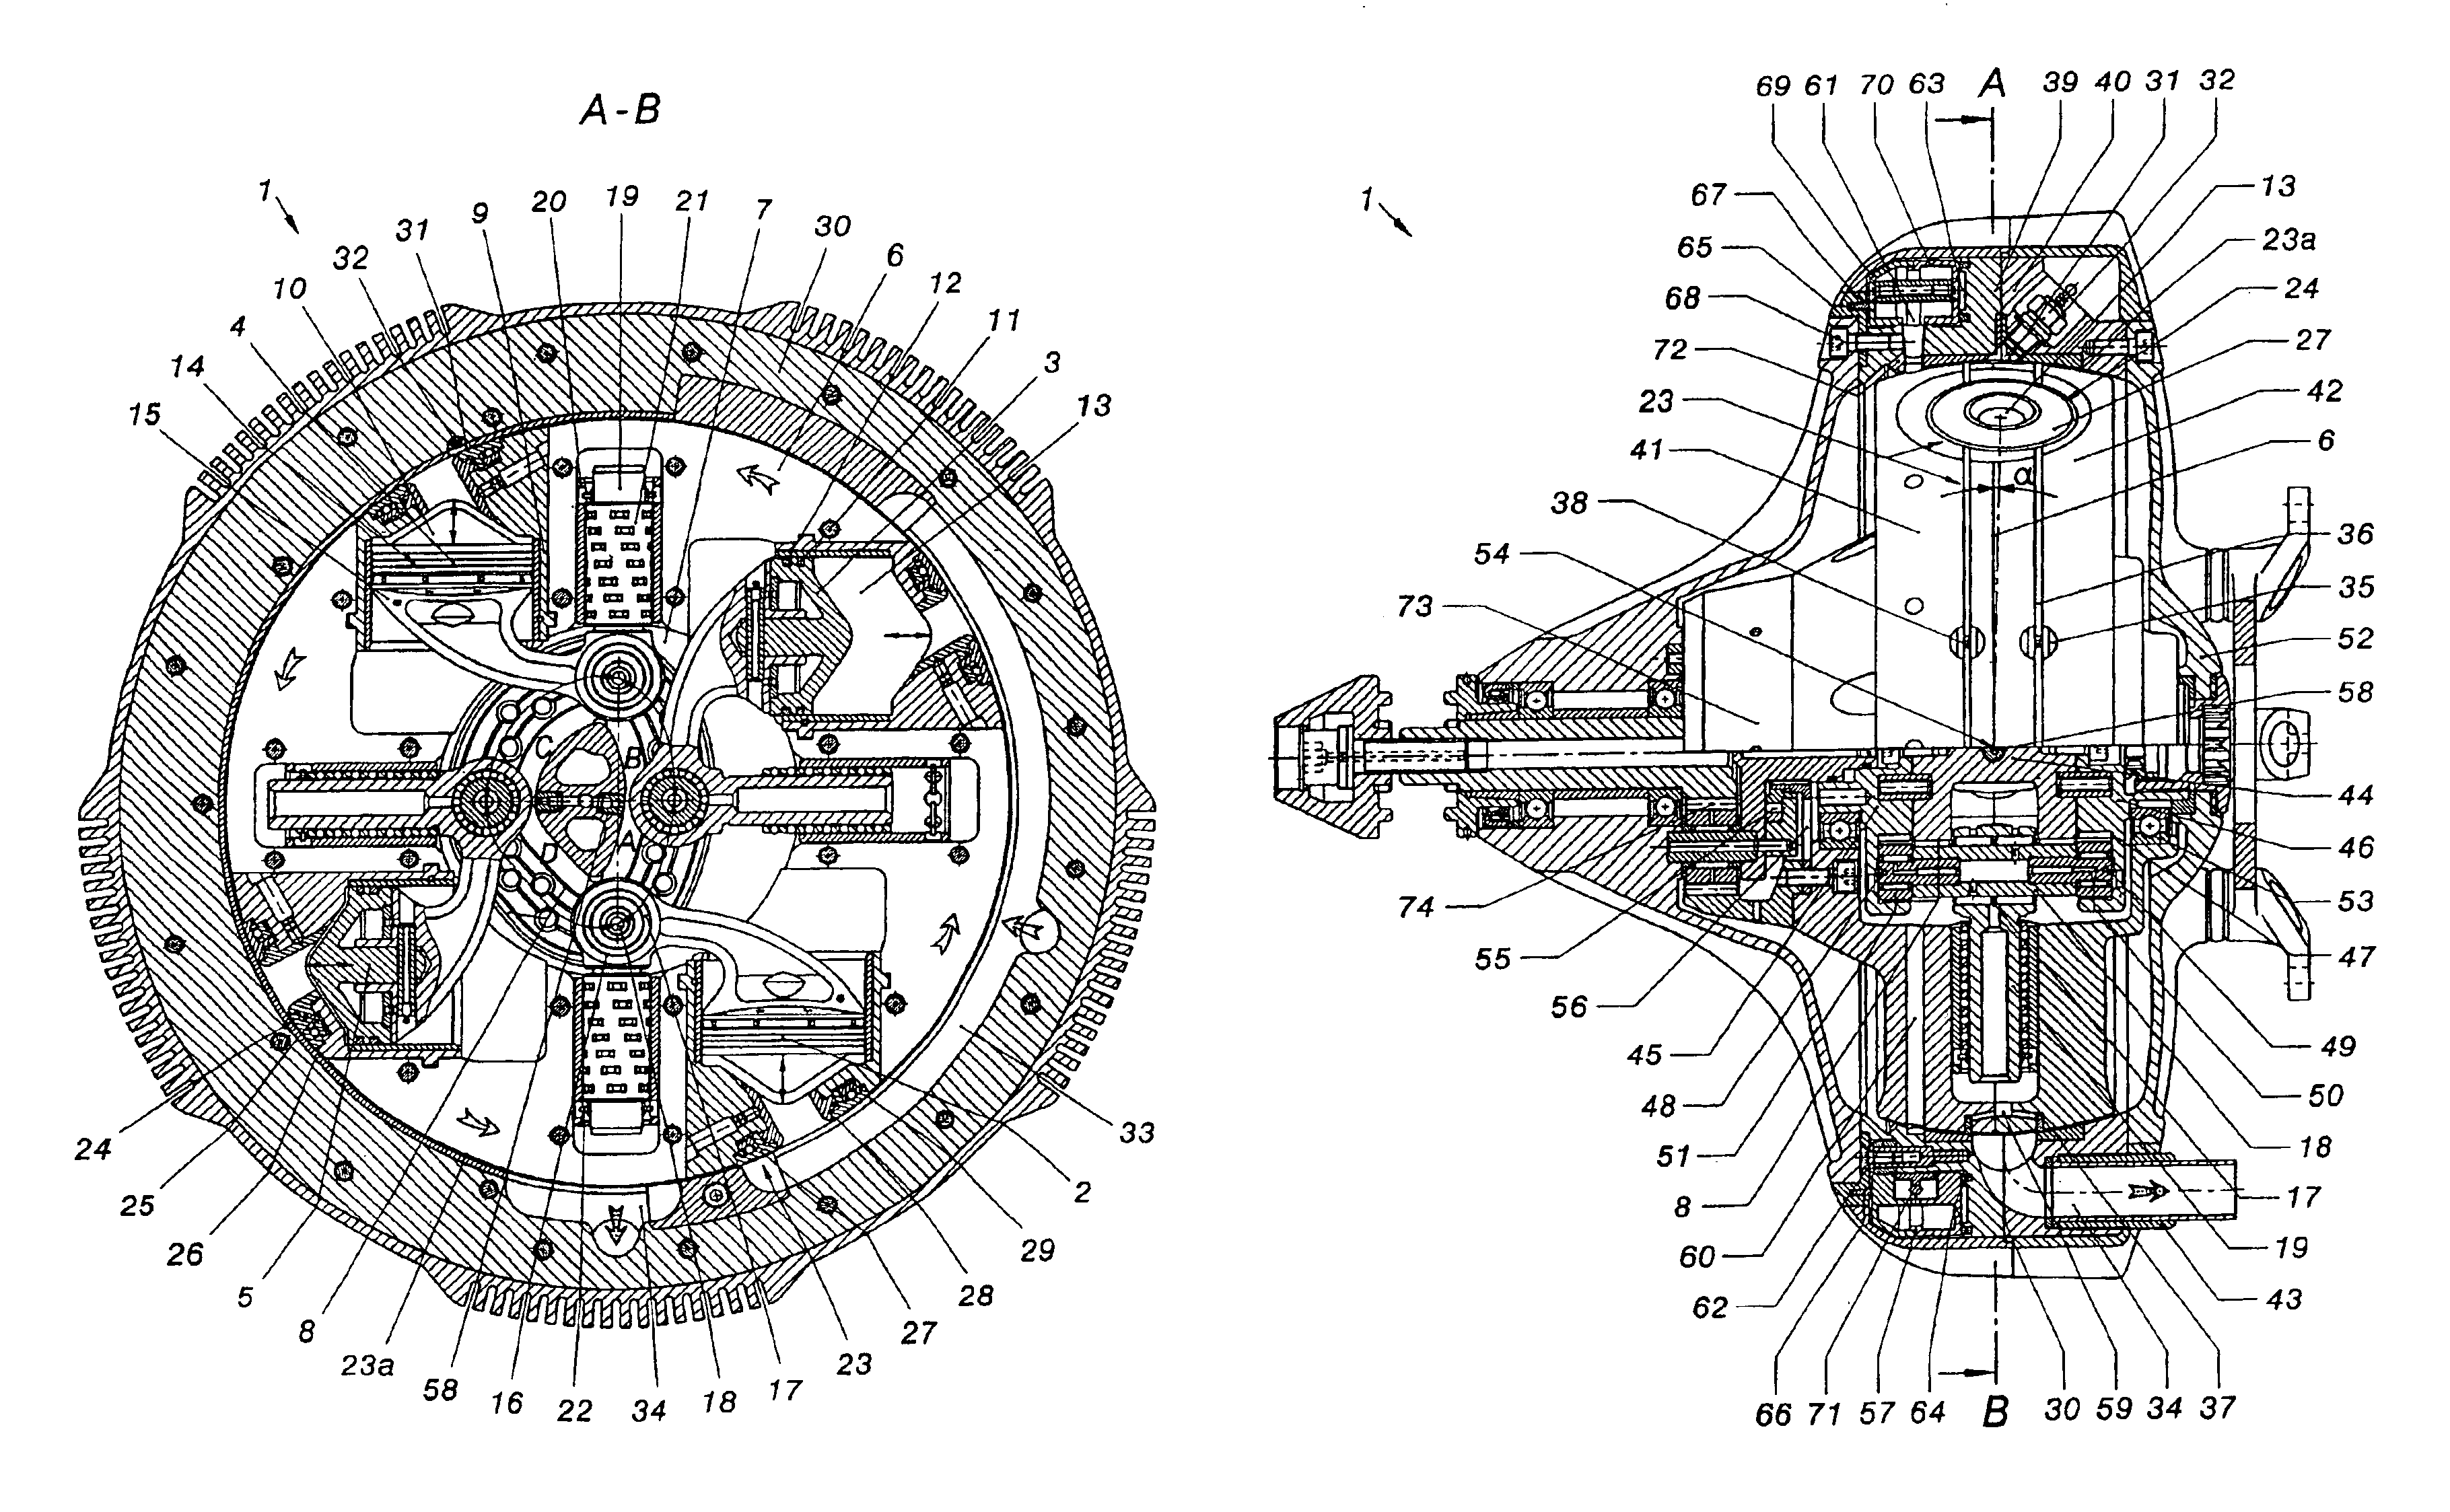 Reciprocating piston engine comprising a rotative cylinder